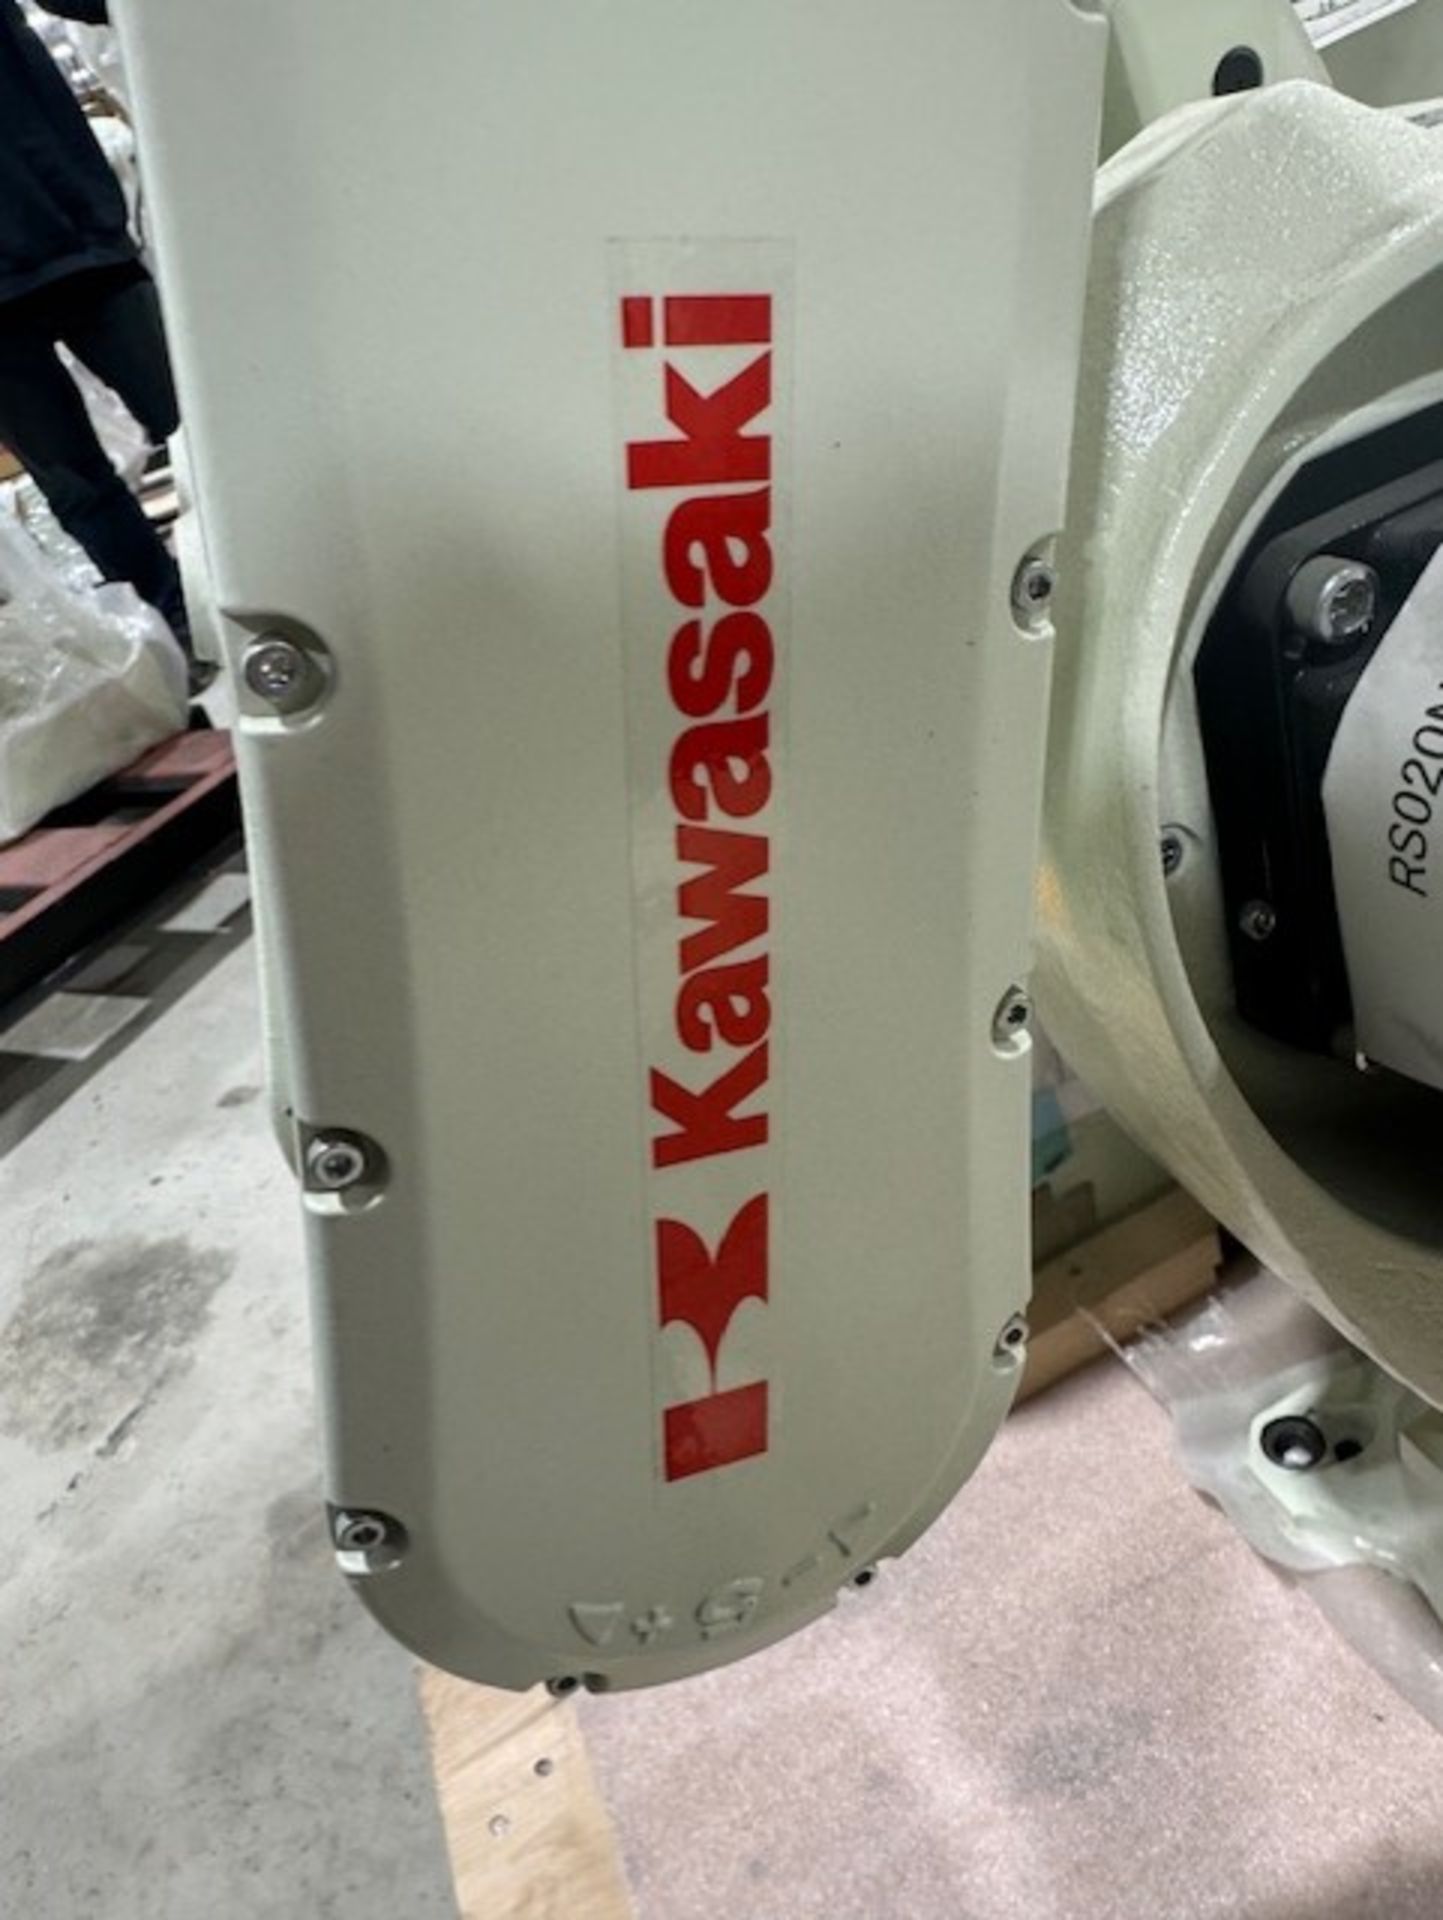 NEW KAWASAKI ROBOT MODEL RS020N, SN 4718, 20KG X 1725MM REACH WITH EO1 CONTROLS, CABLES & TEACH - Image 5 of 7